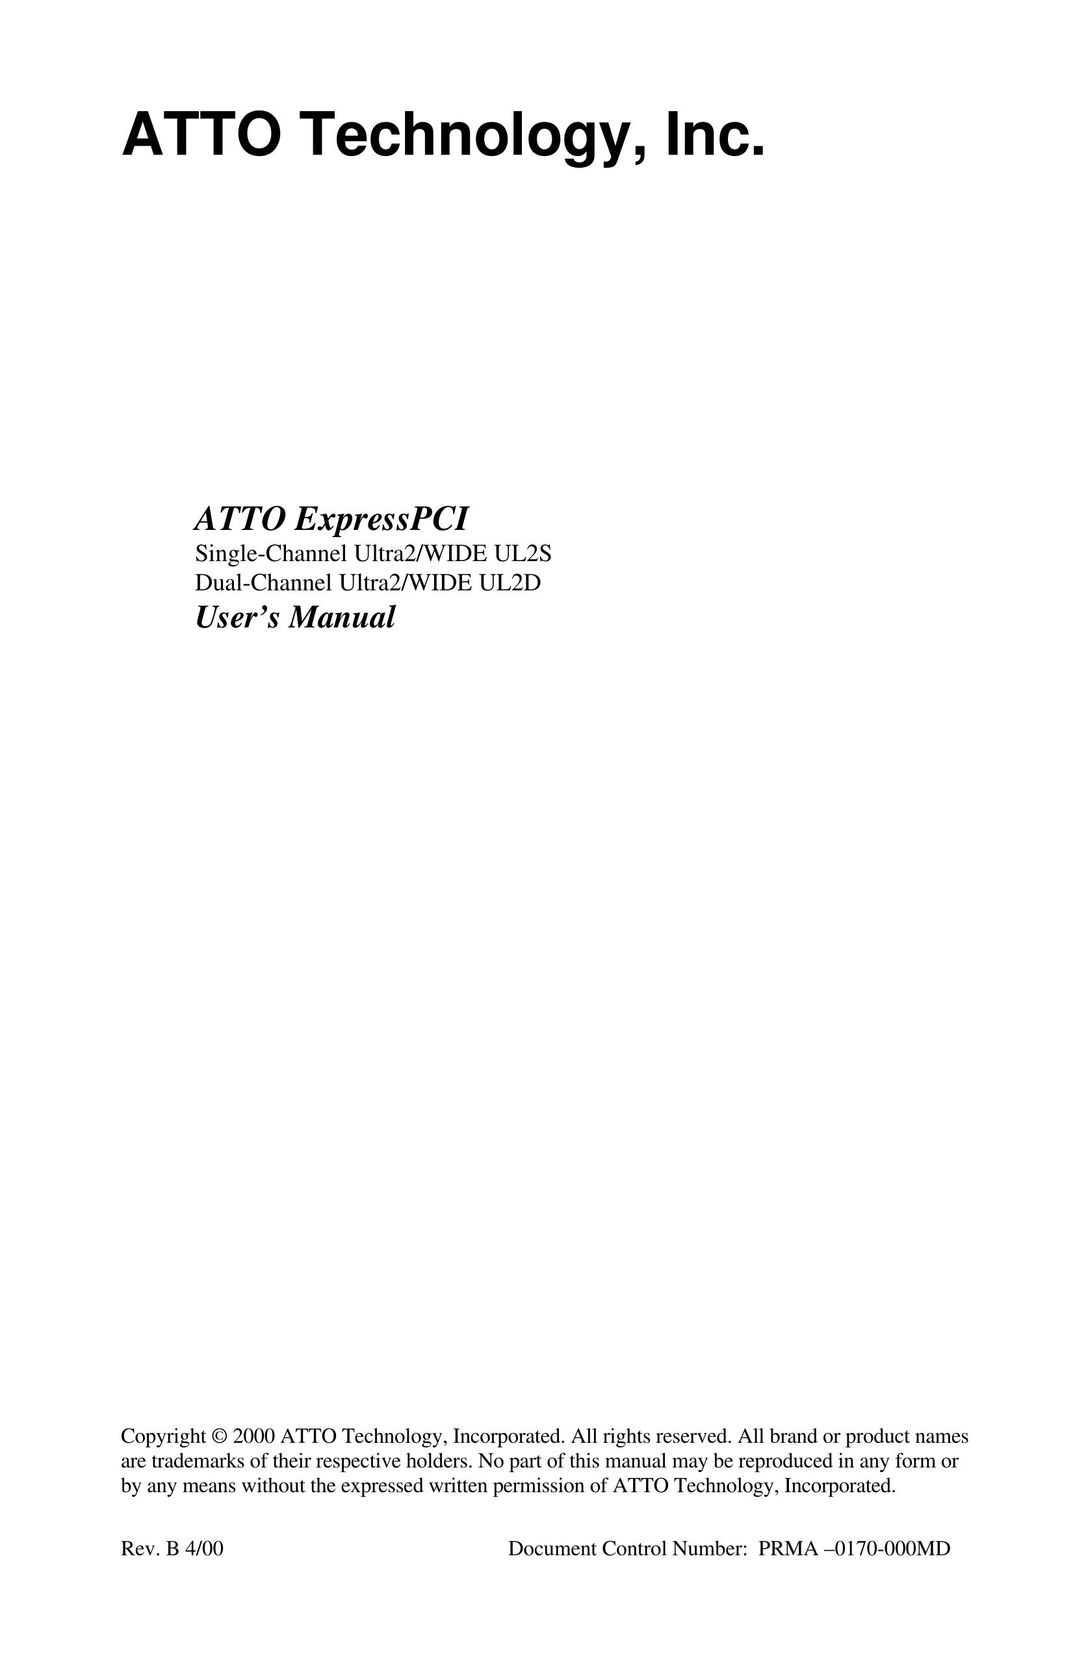 ATTO Technology UL2D Network Card User Manual